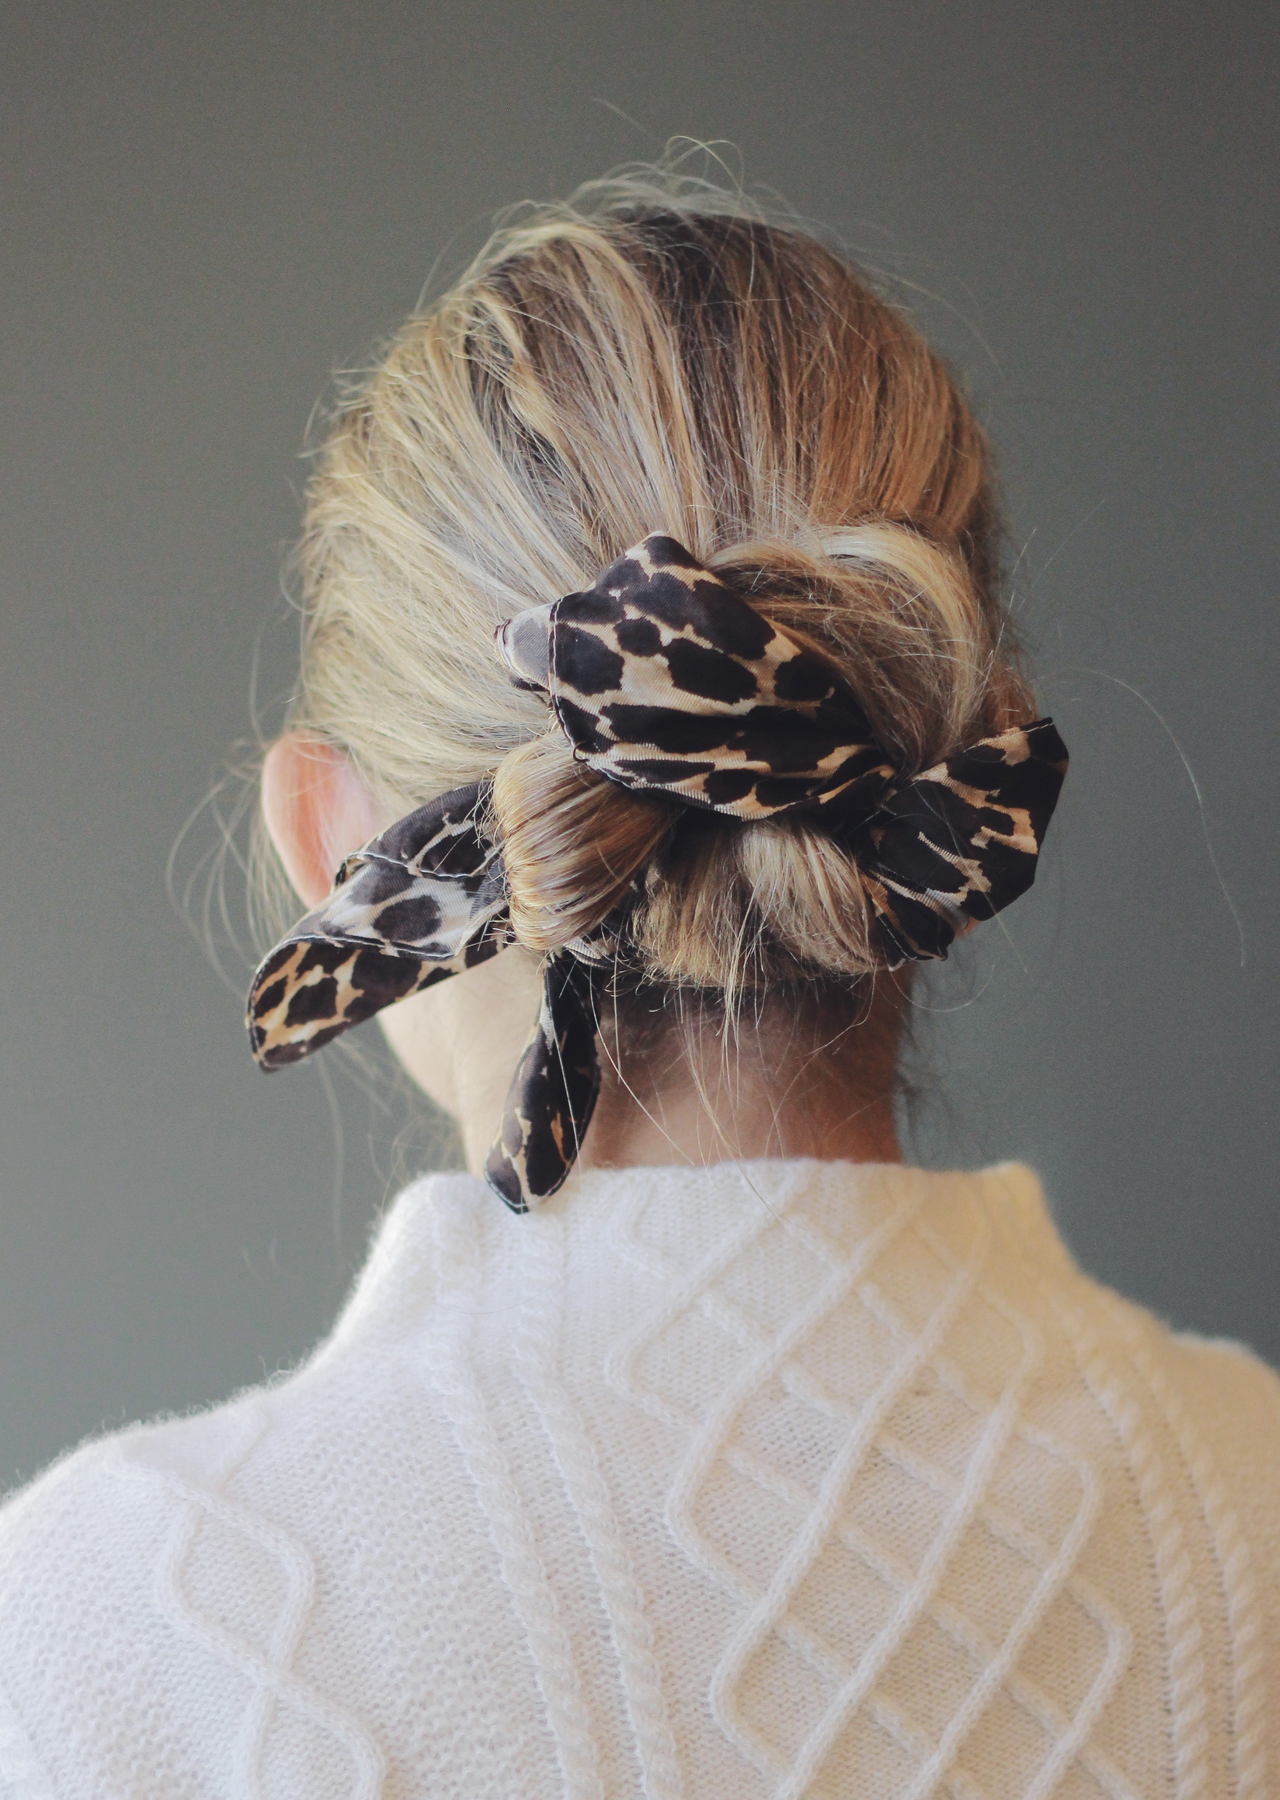 The Steele Maiden: 3 New Ways to Wear a Hair Scarf this Fall